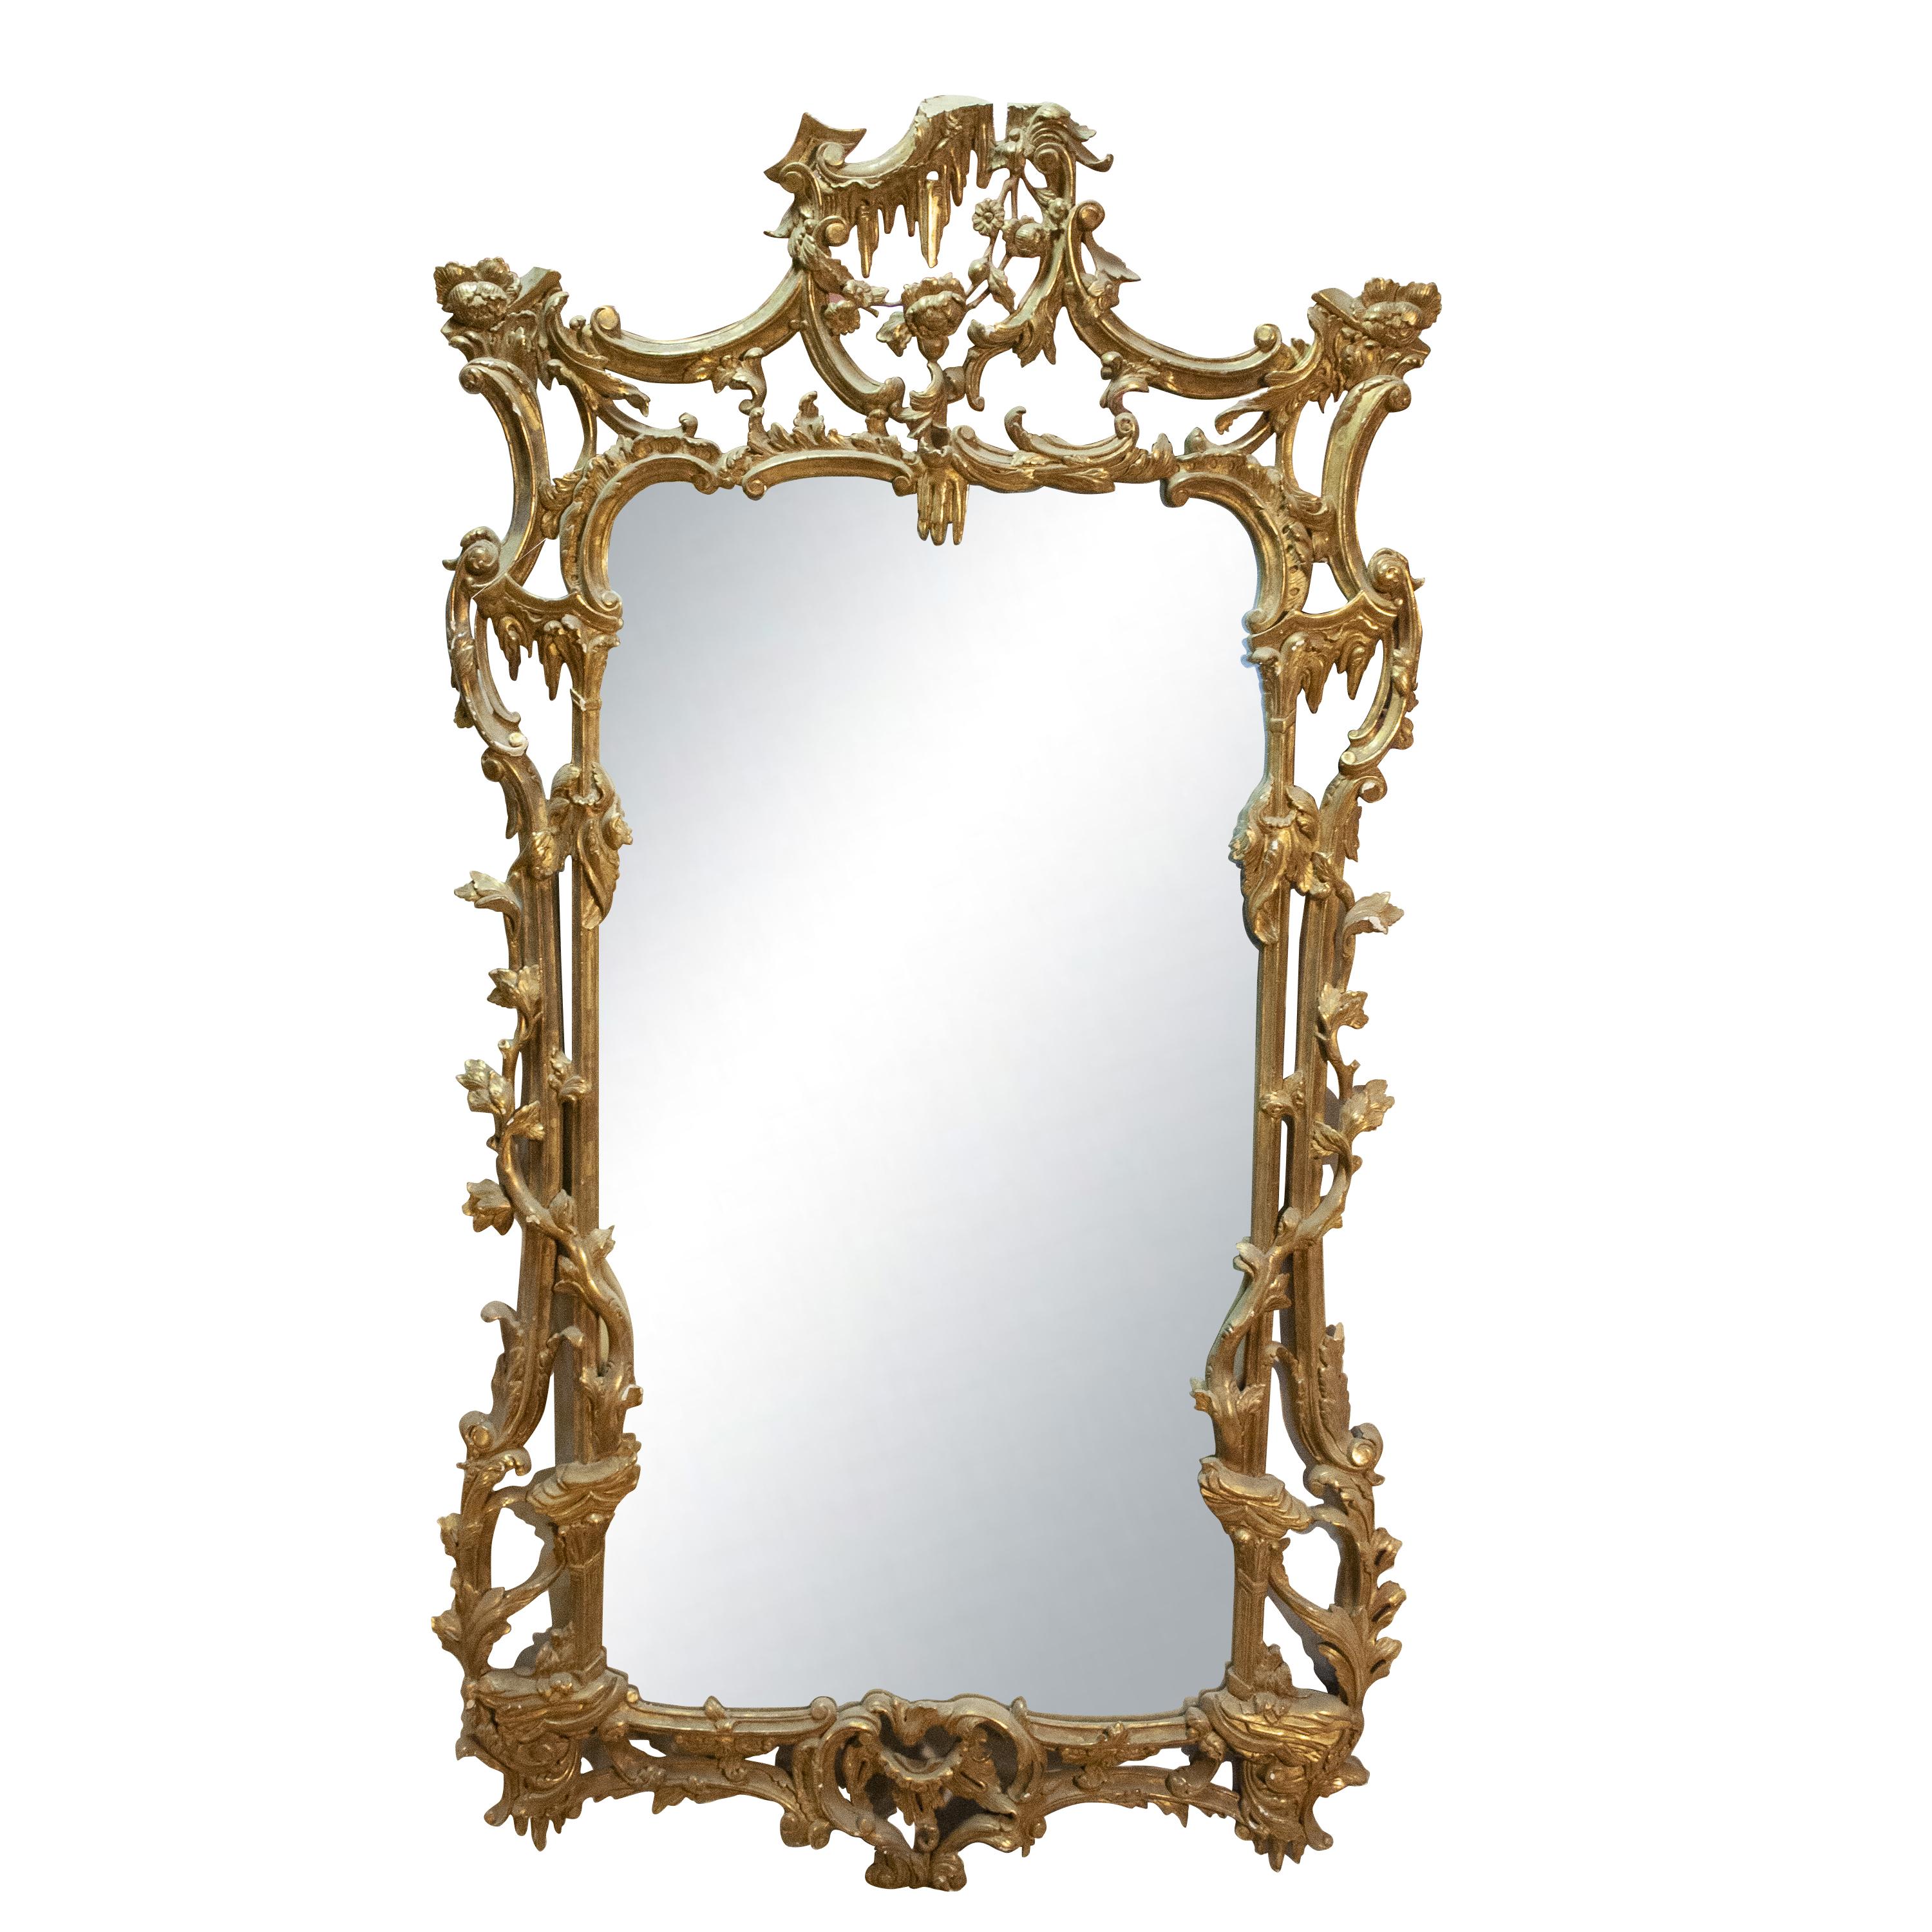 Handcrafted carved Regency Style wood mirror covered in gold foil.